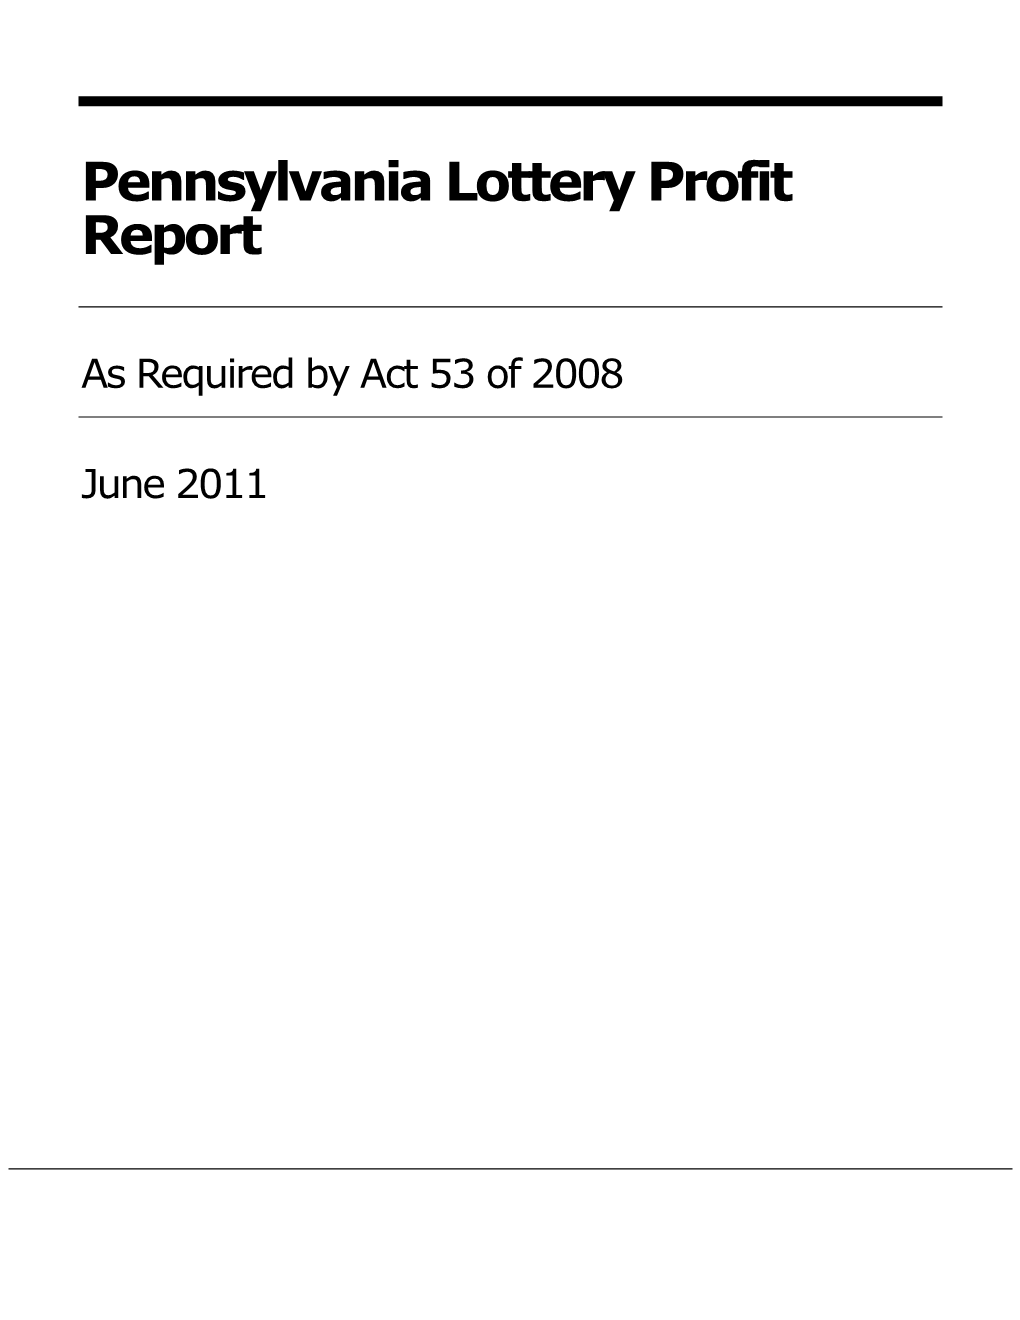 Profit Report for the Pennsylvania Lottery